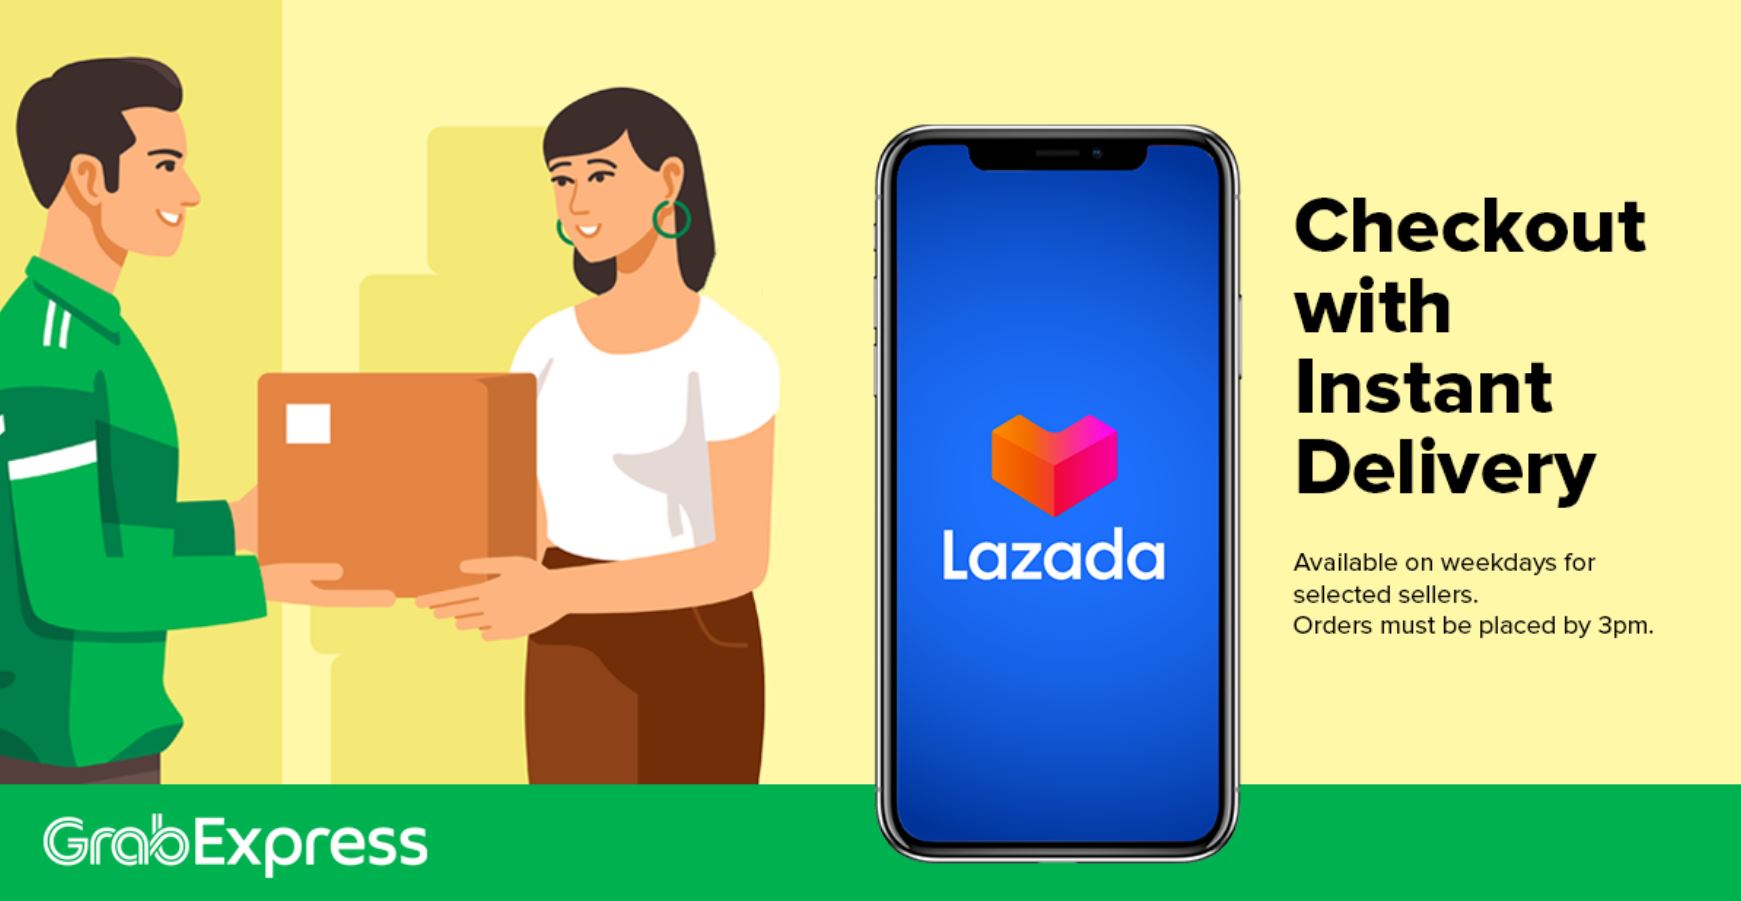 Lazada sellers can now offer same-day delivery on weekdays with GrabExpress, creating faster delivery options for consumers - Alvinology